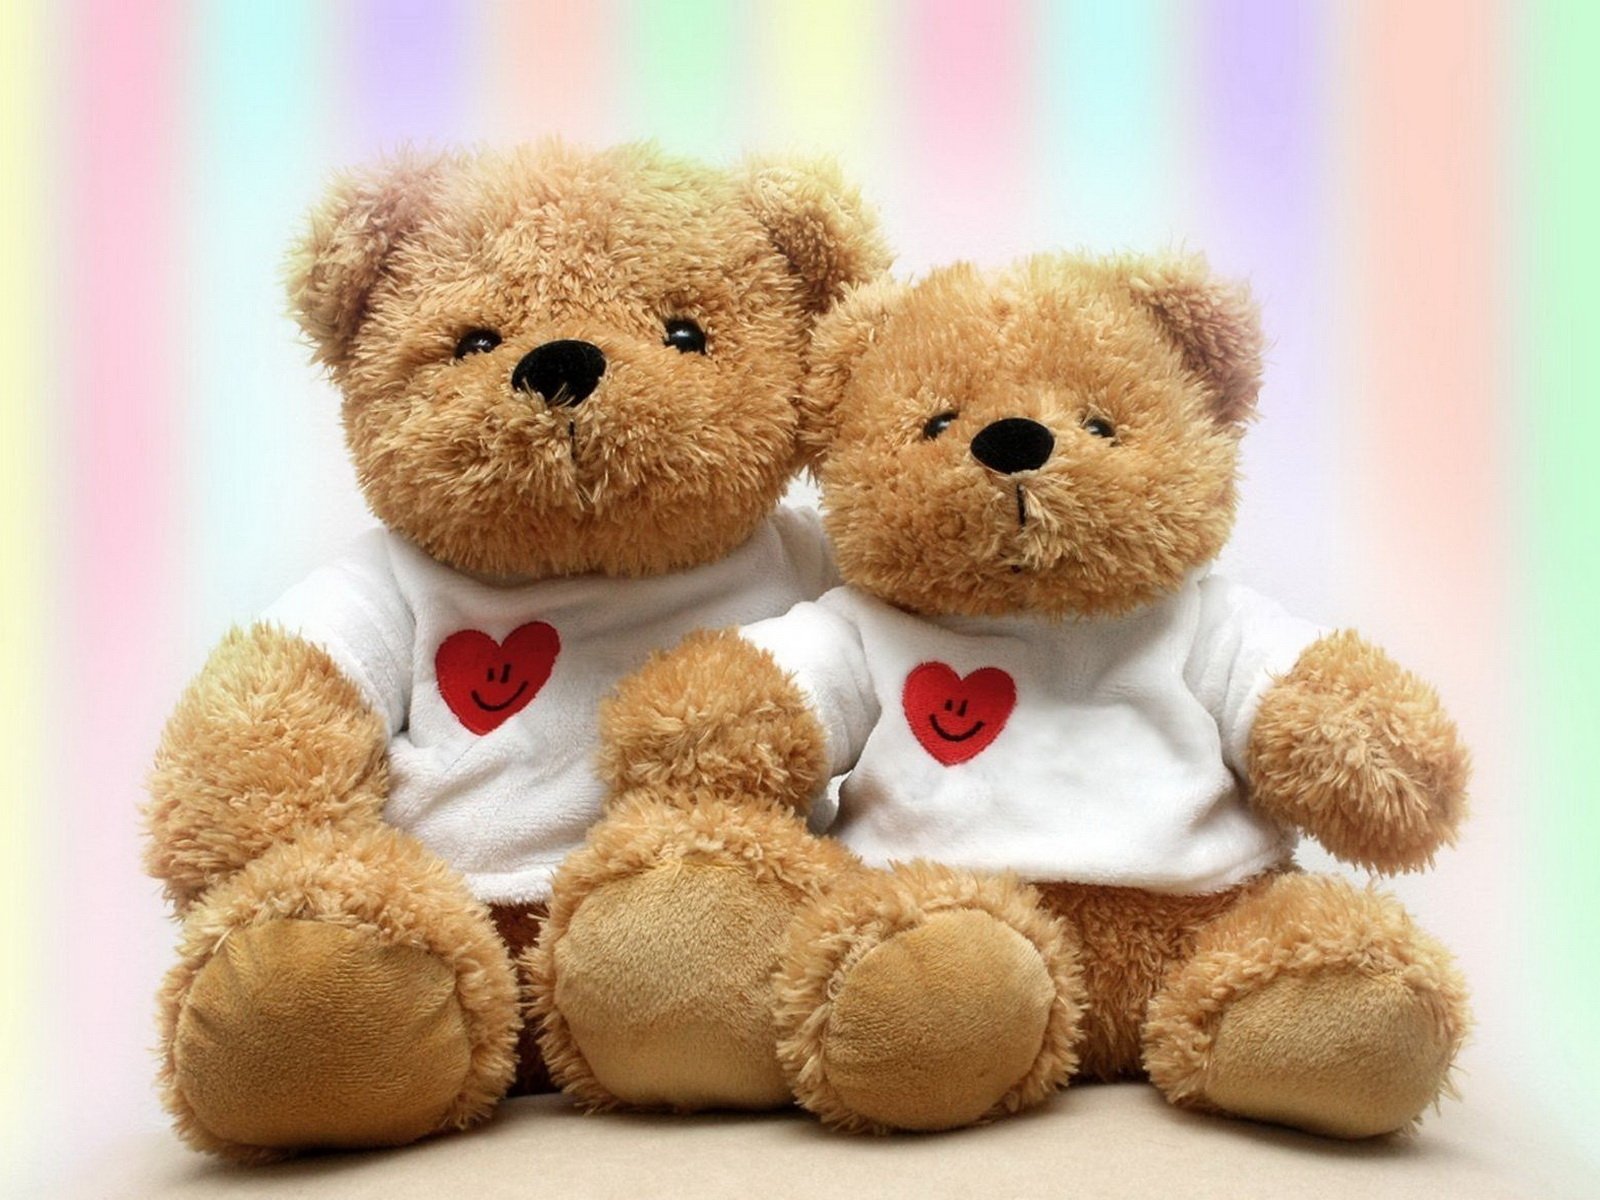 Teddy Bear Lonely Windows 8 Theme and Wallpapers All for Windows